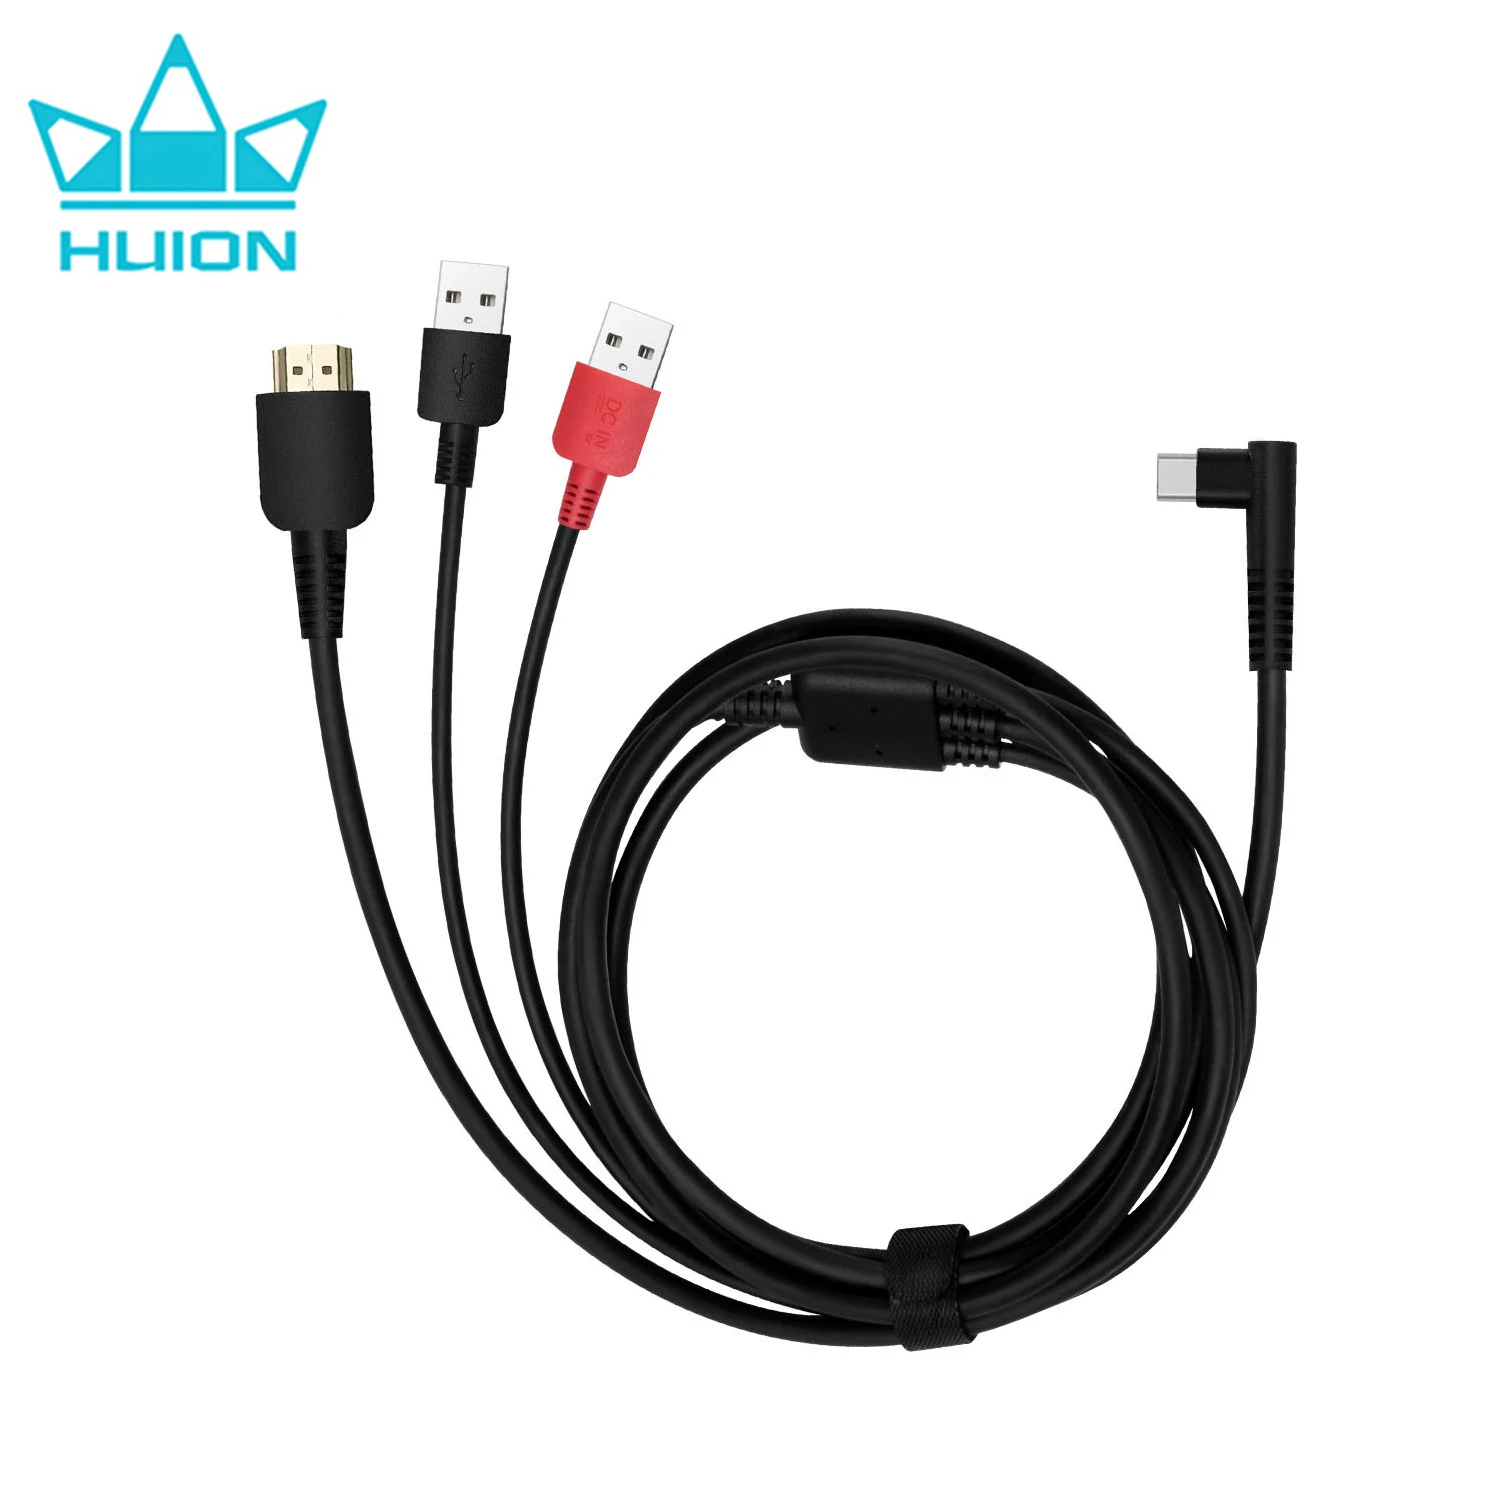 HUION 3 IN 1 Cable for Kamvas 13 Graphics Tablet Monitor Pen Display HDMI DP Signal Type C Port Easy Connection to PC Notebook